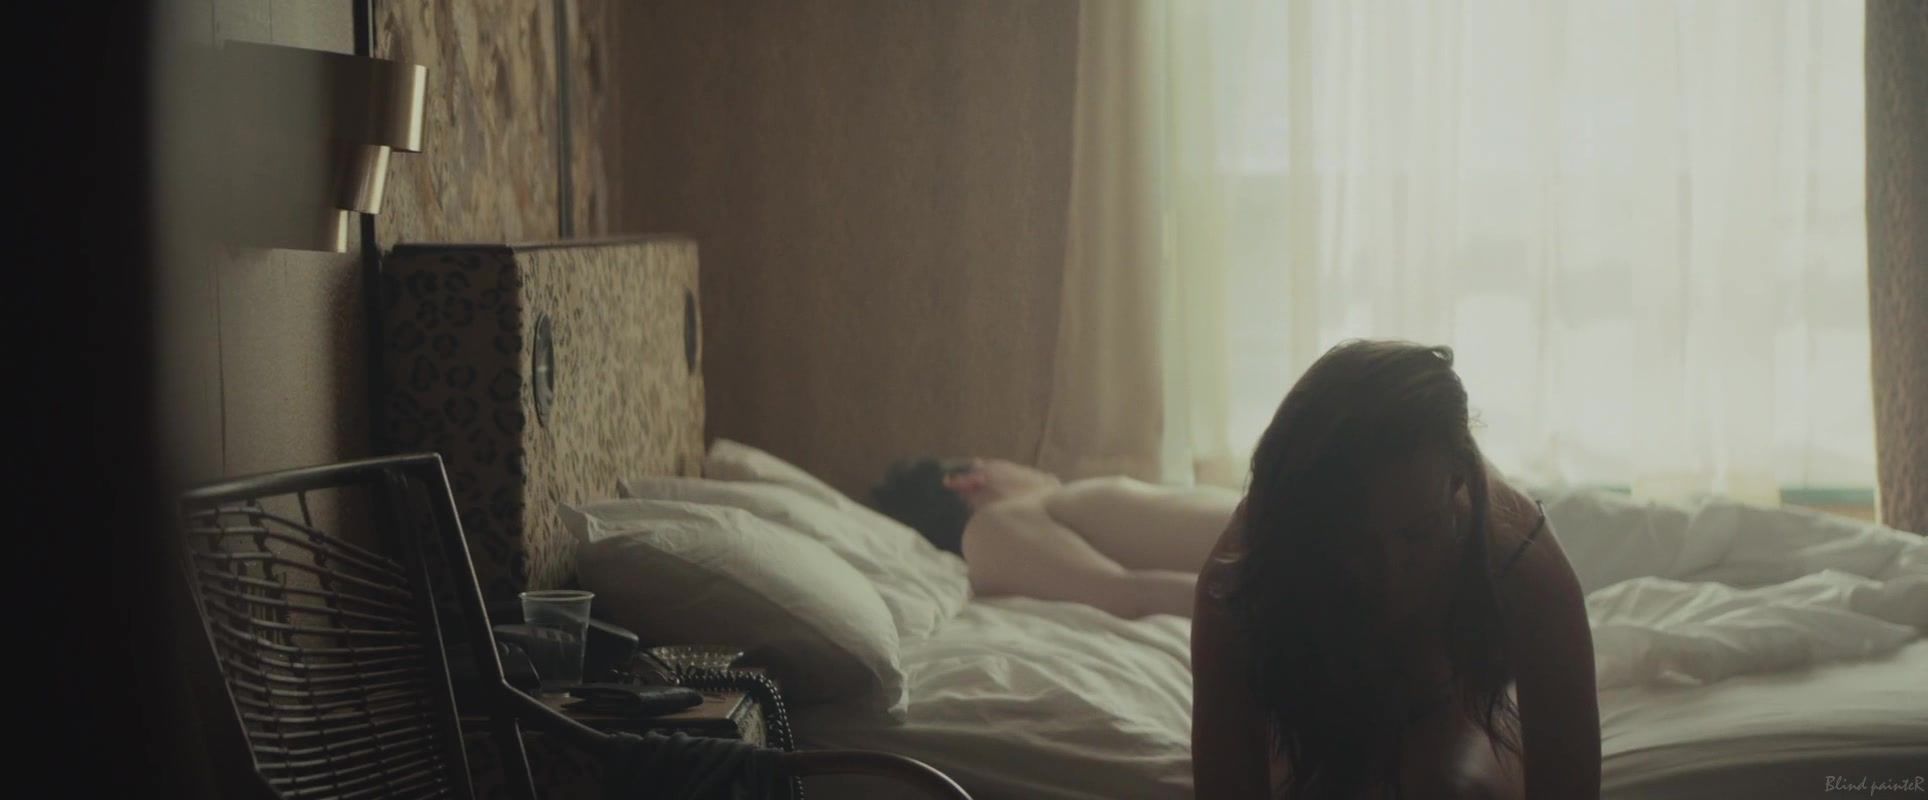 Banging Olivia Wilde nude - Meadowland (2015) DonkParty